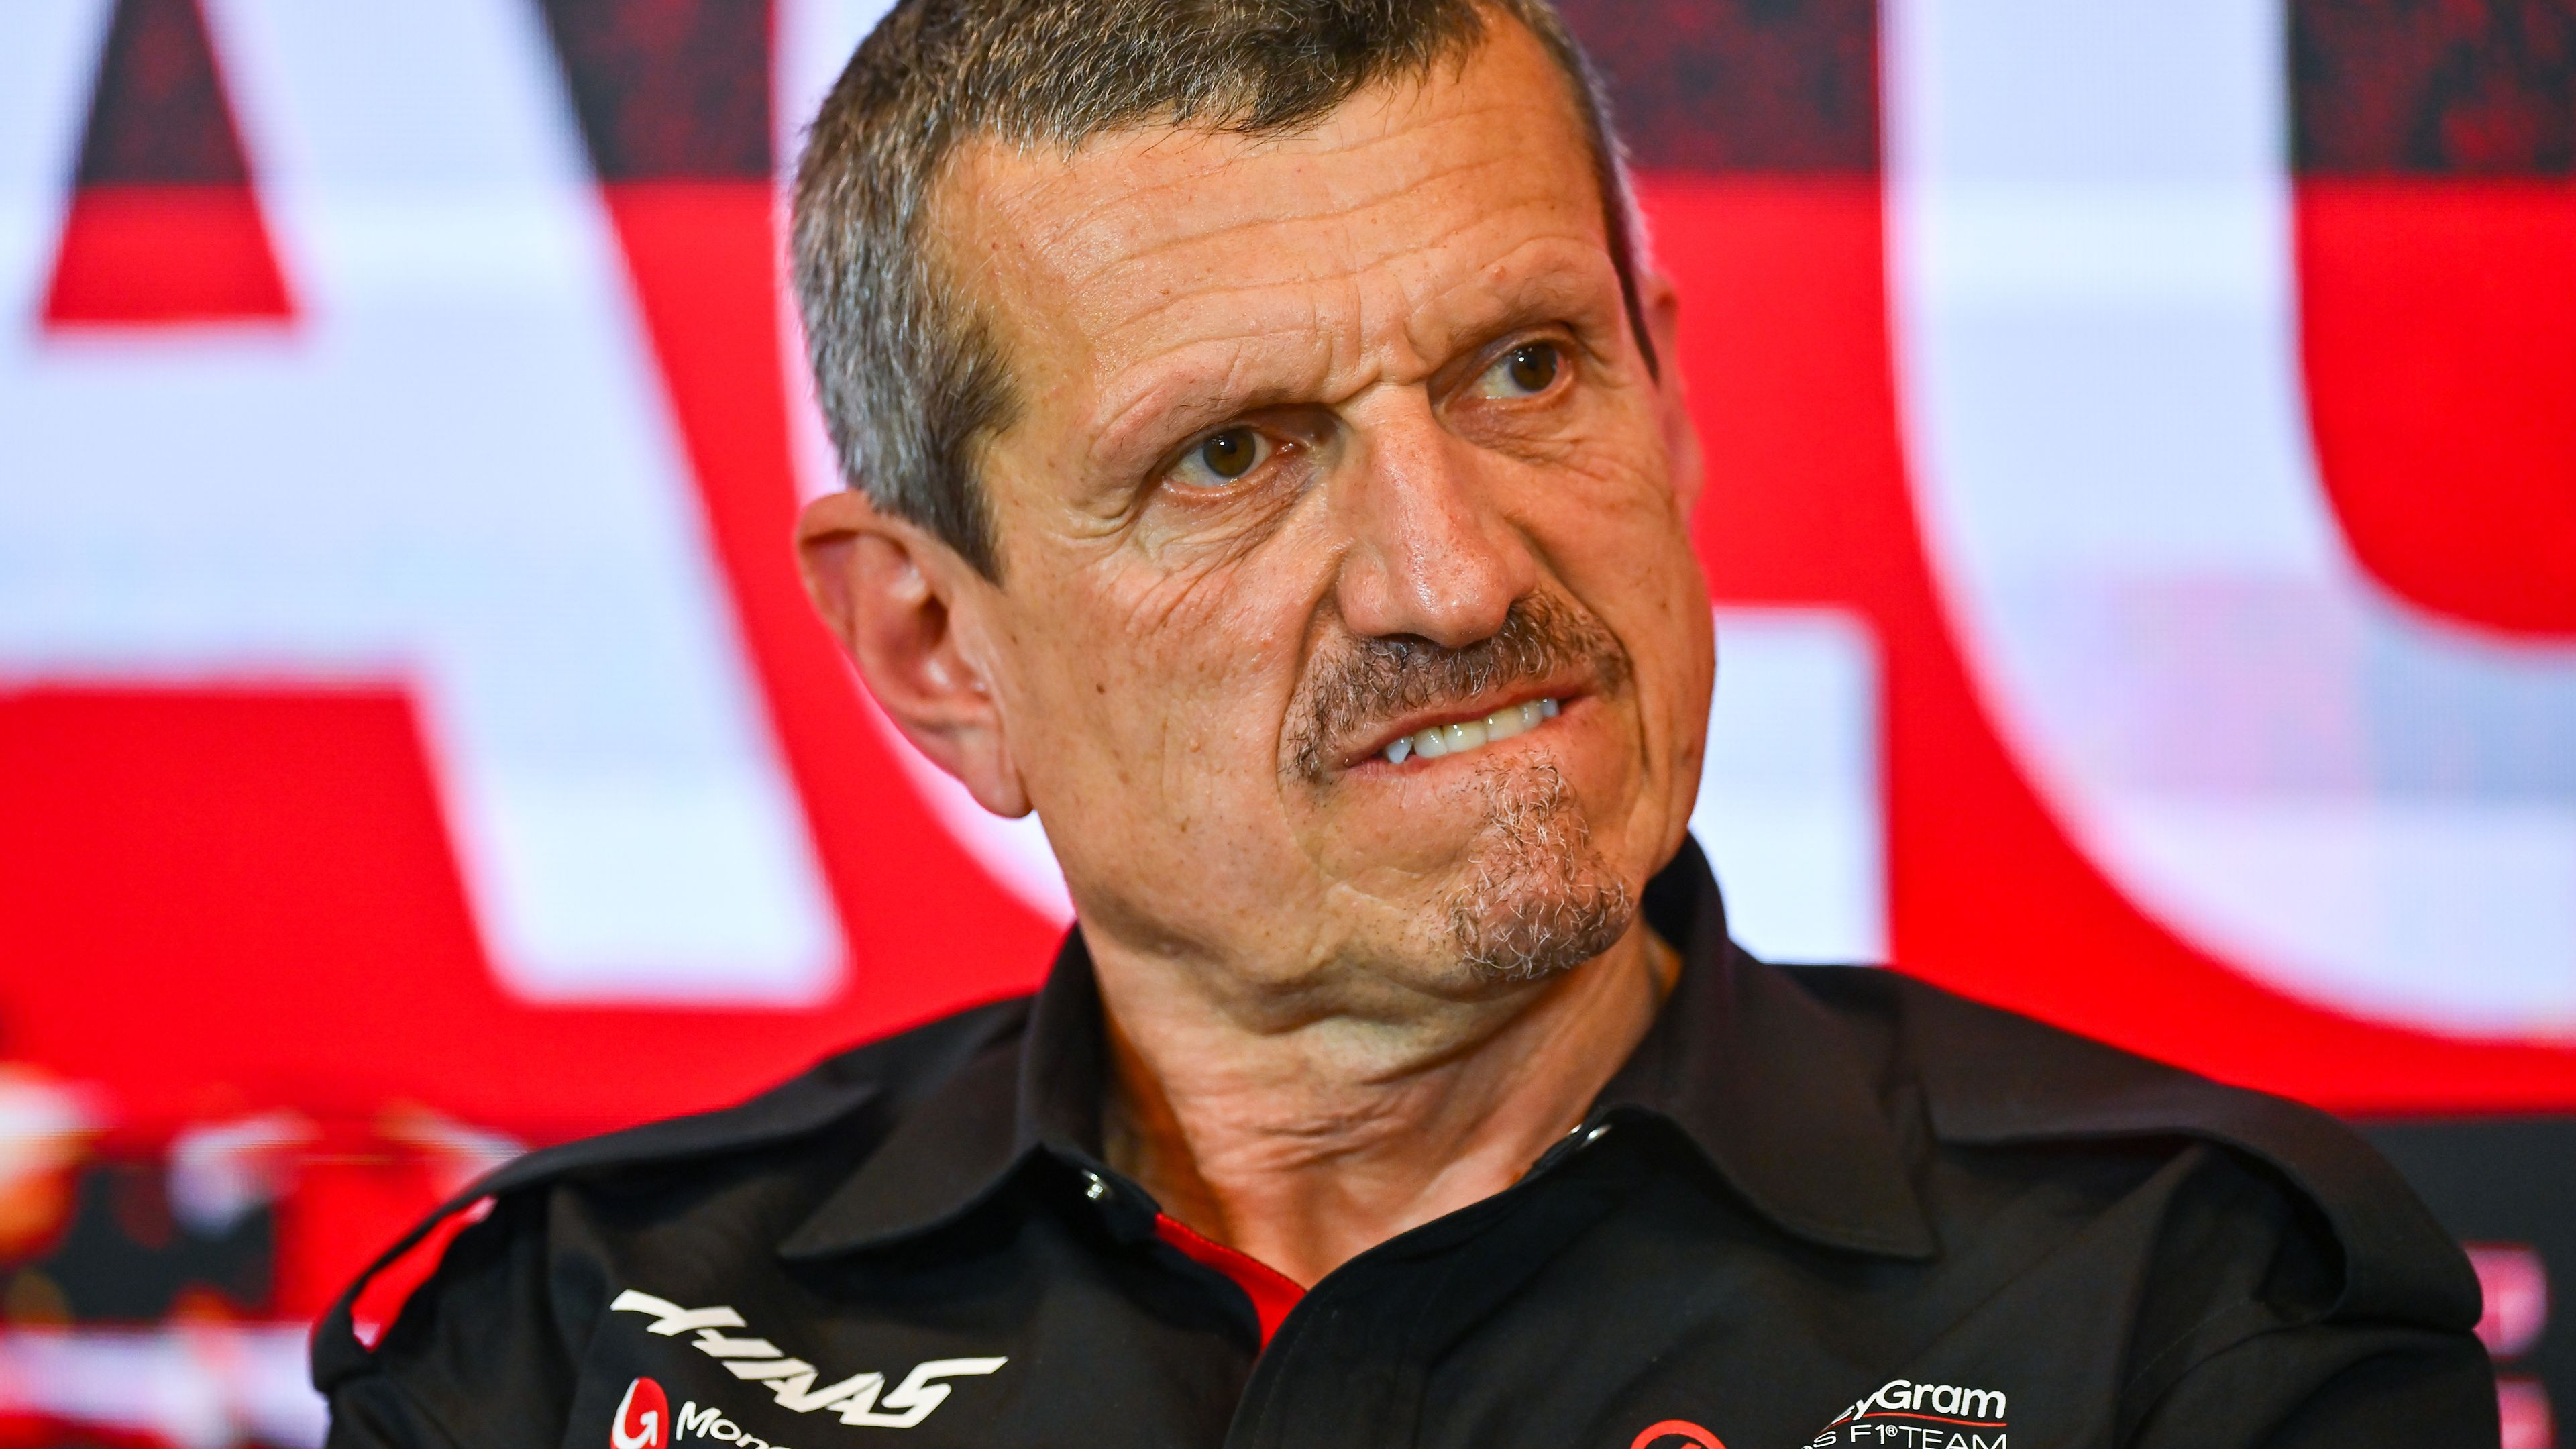 Haas F1 team principal Guenther Steiner reprimanded and apologises for calling race stewards 'laymen'